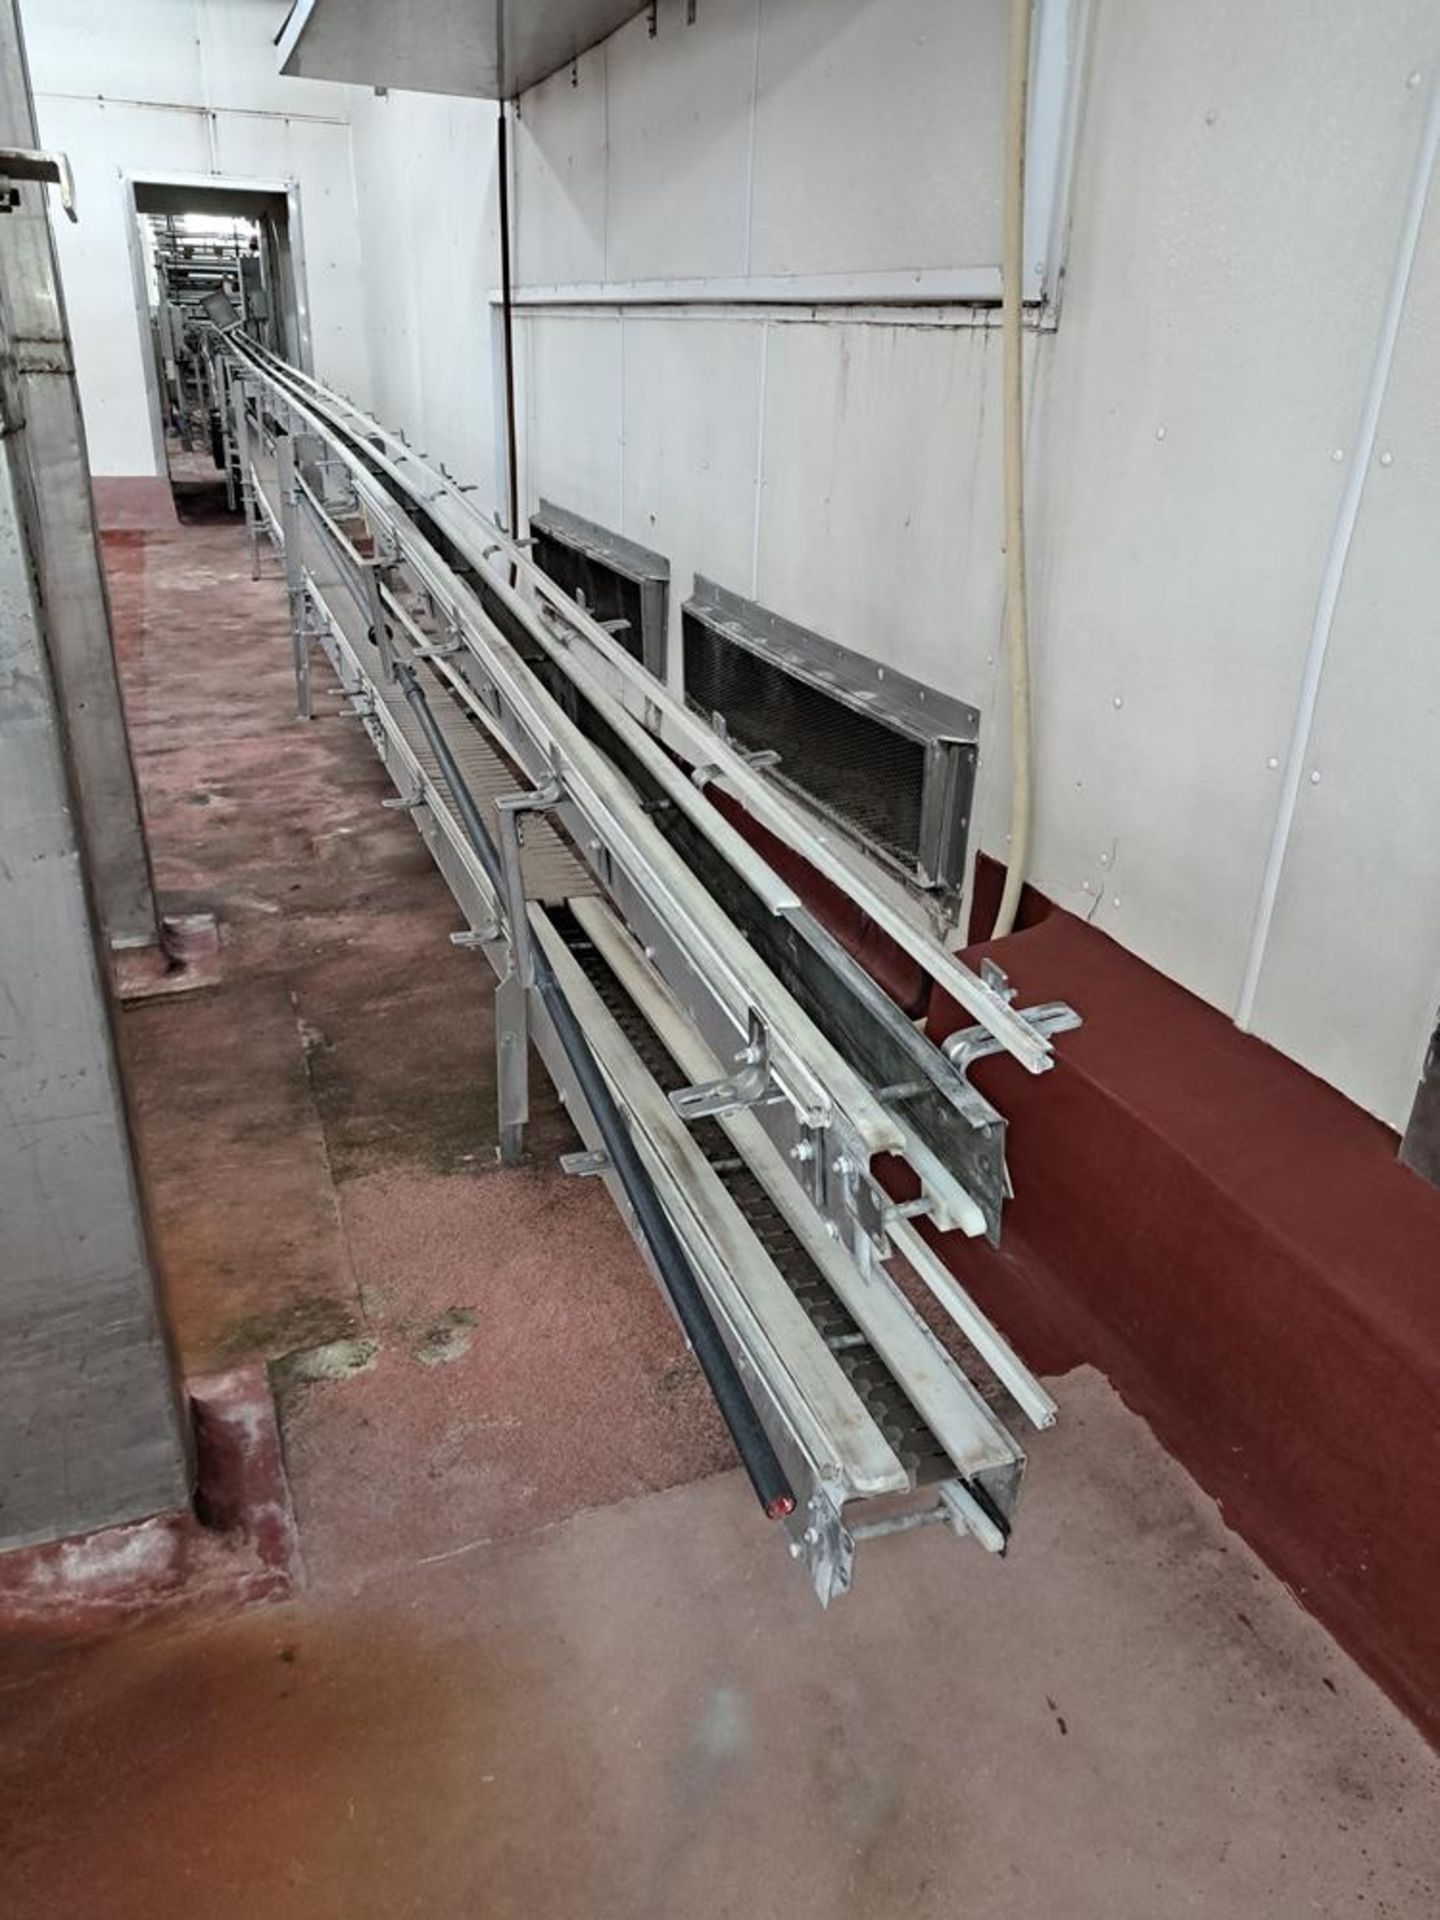 Lot Double Lane Conveyor, 10" wide X approx. 200' long plastic belts, Electric Drives: Required - Image 7 of 11